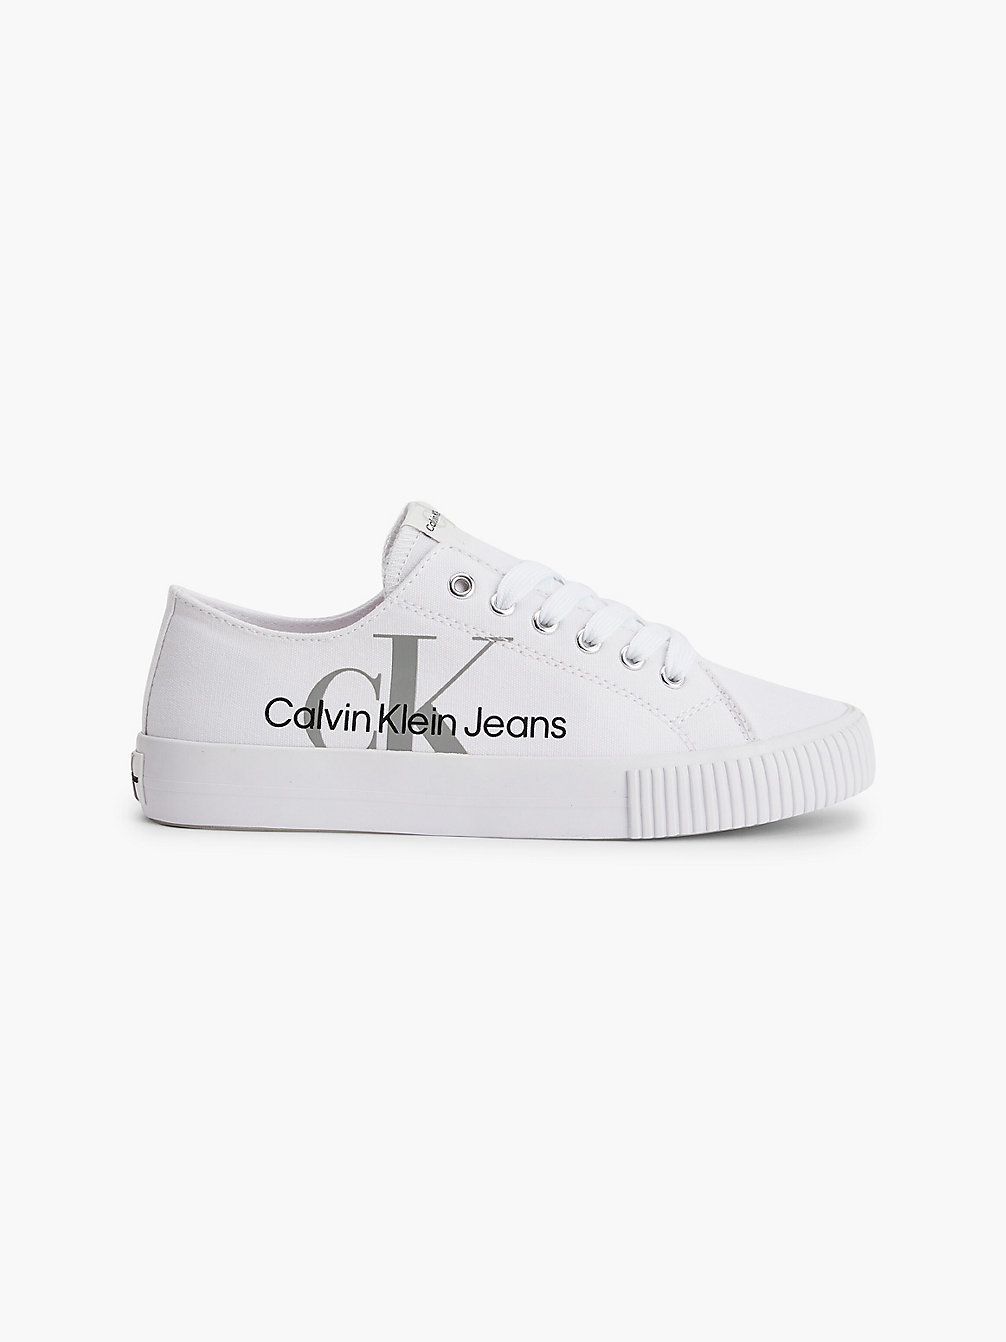 WHITE Recycled Canvas Trainers undefined kids unisex Calvin Klein